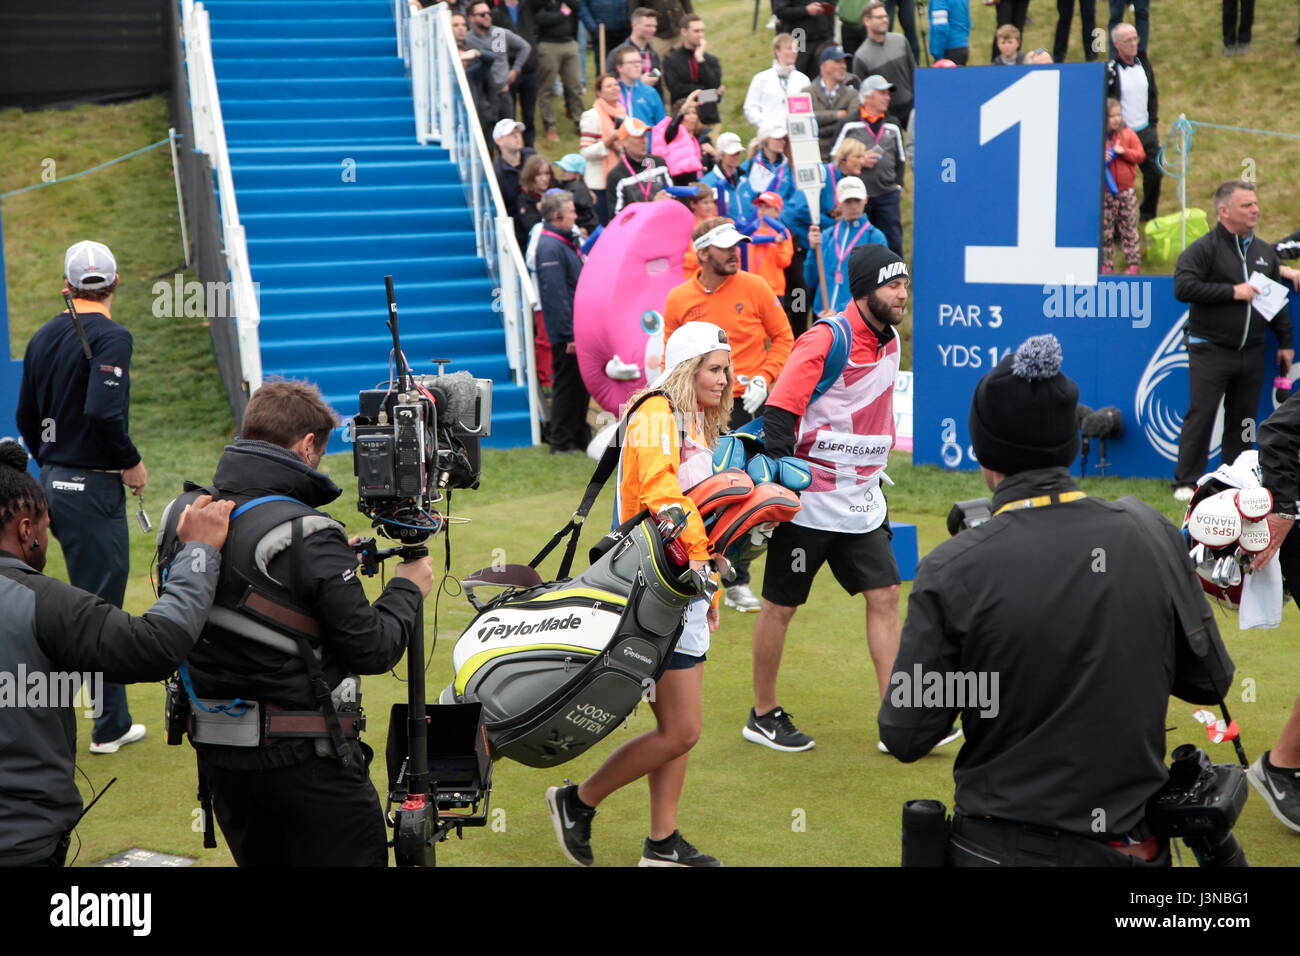 The Dutch Team of The Dutch team of  Reiner Saxton and Caddy Melanie Saxton, caddy Melanie Lancaster and Joost Luiten at the golfSIXES event Stock Photo